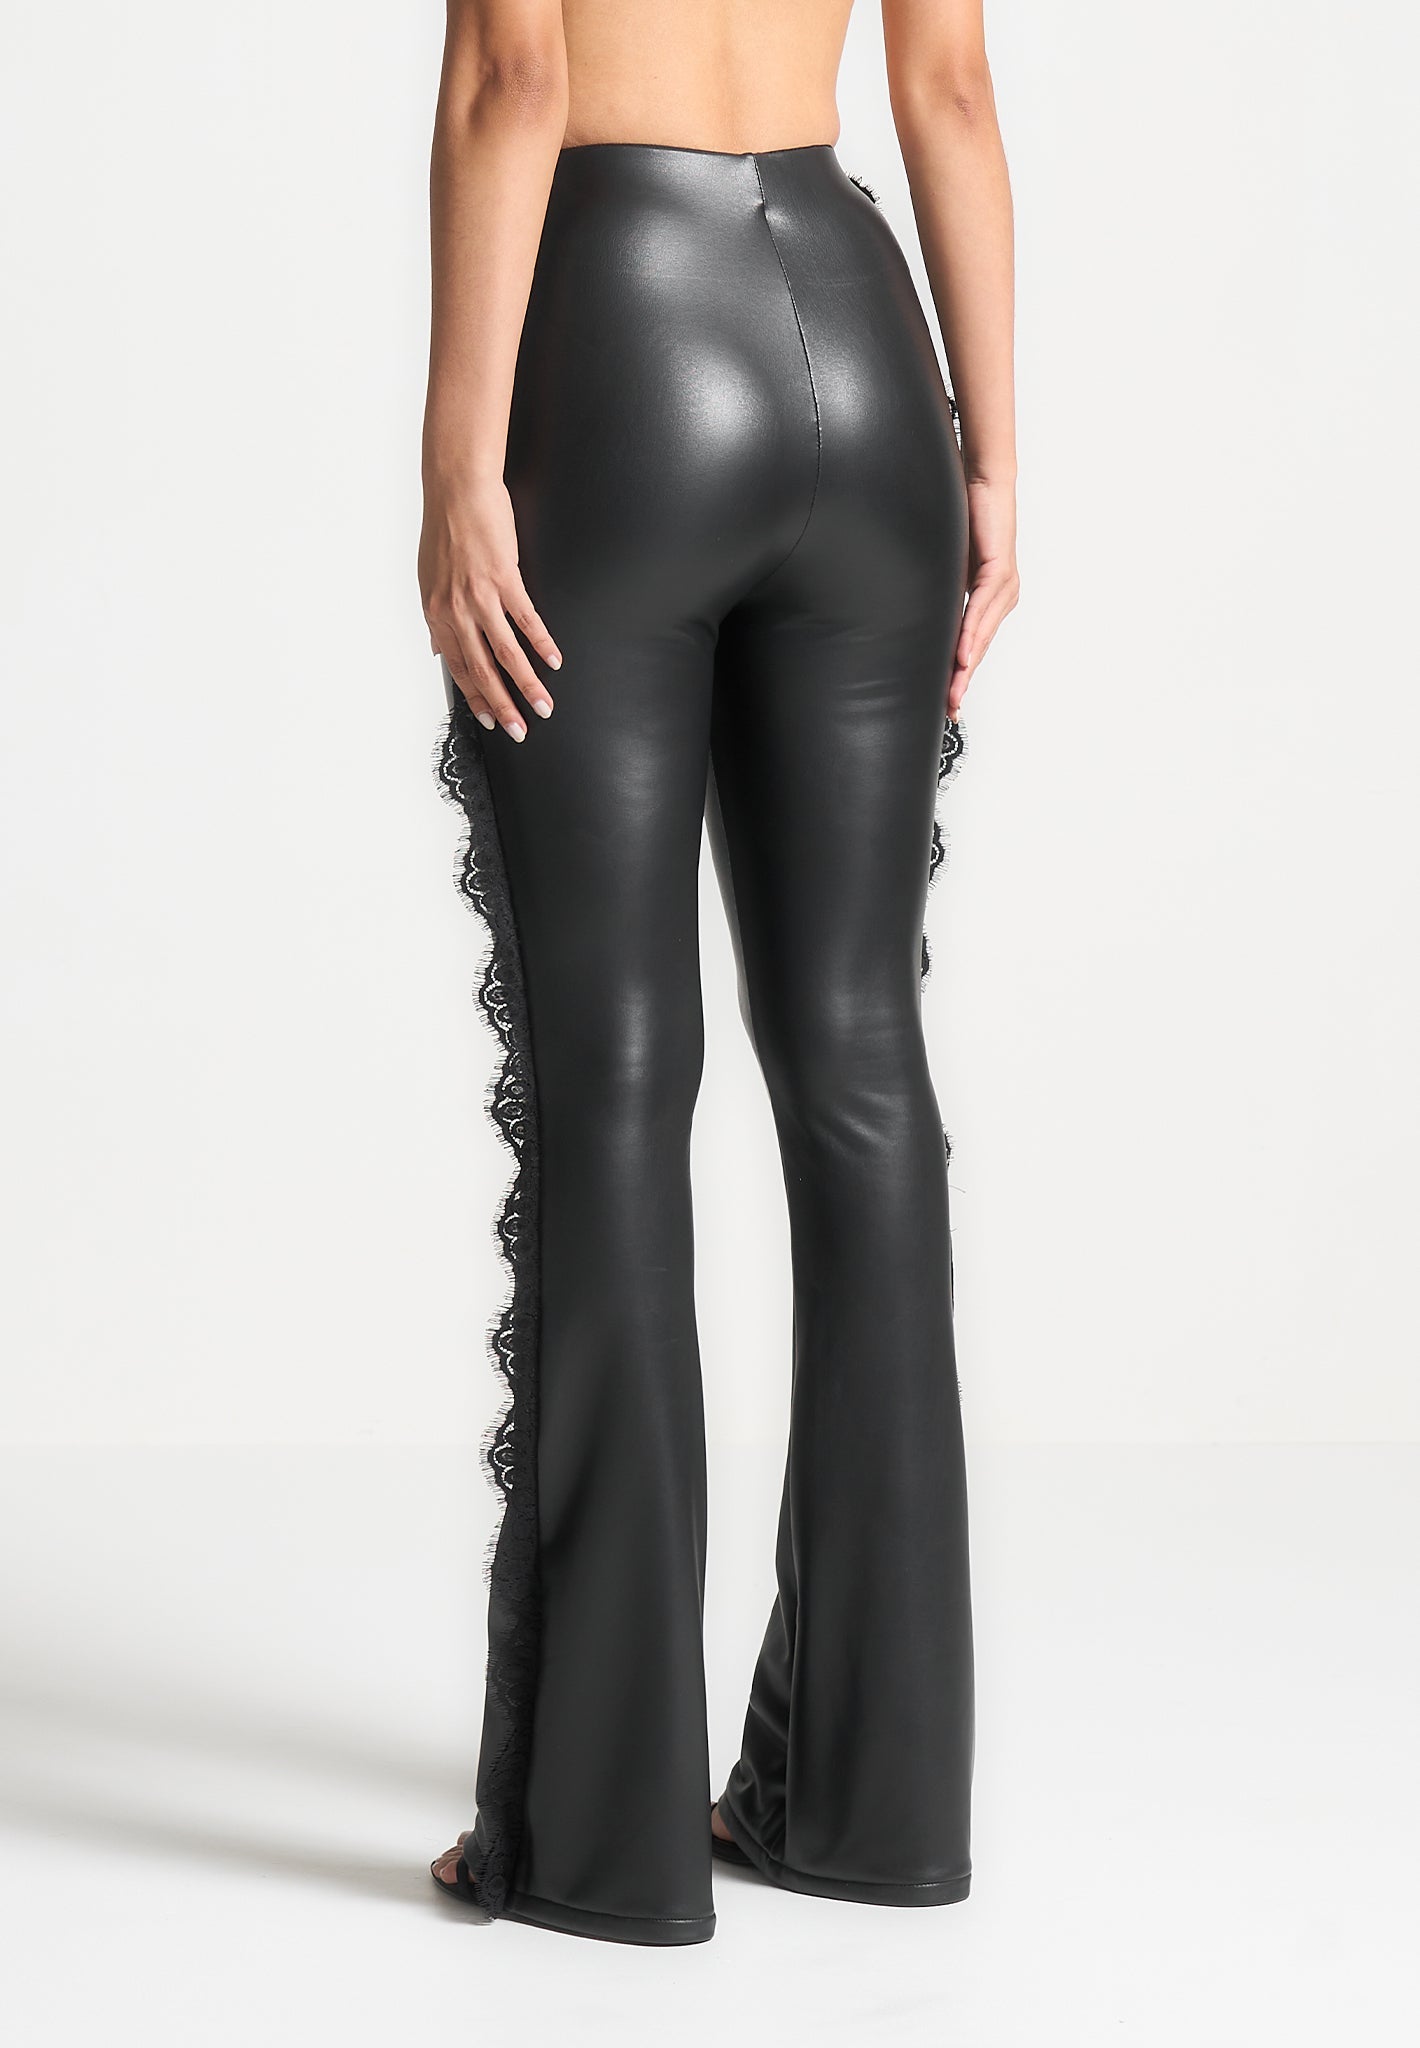 lace-trim-vegan-leather-fit-and-flare-leggings-black